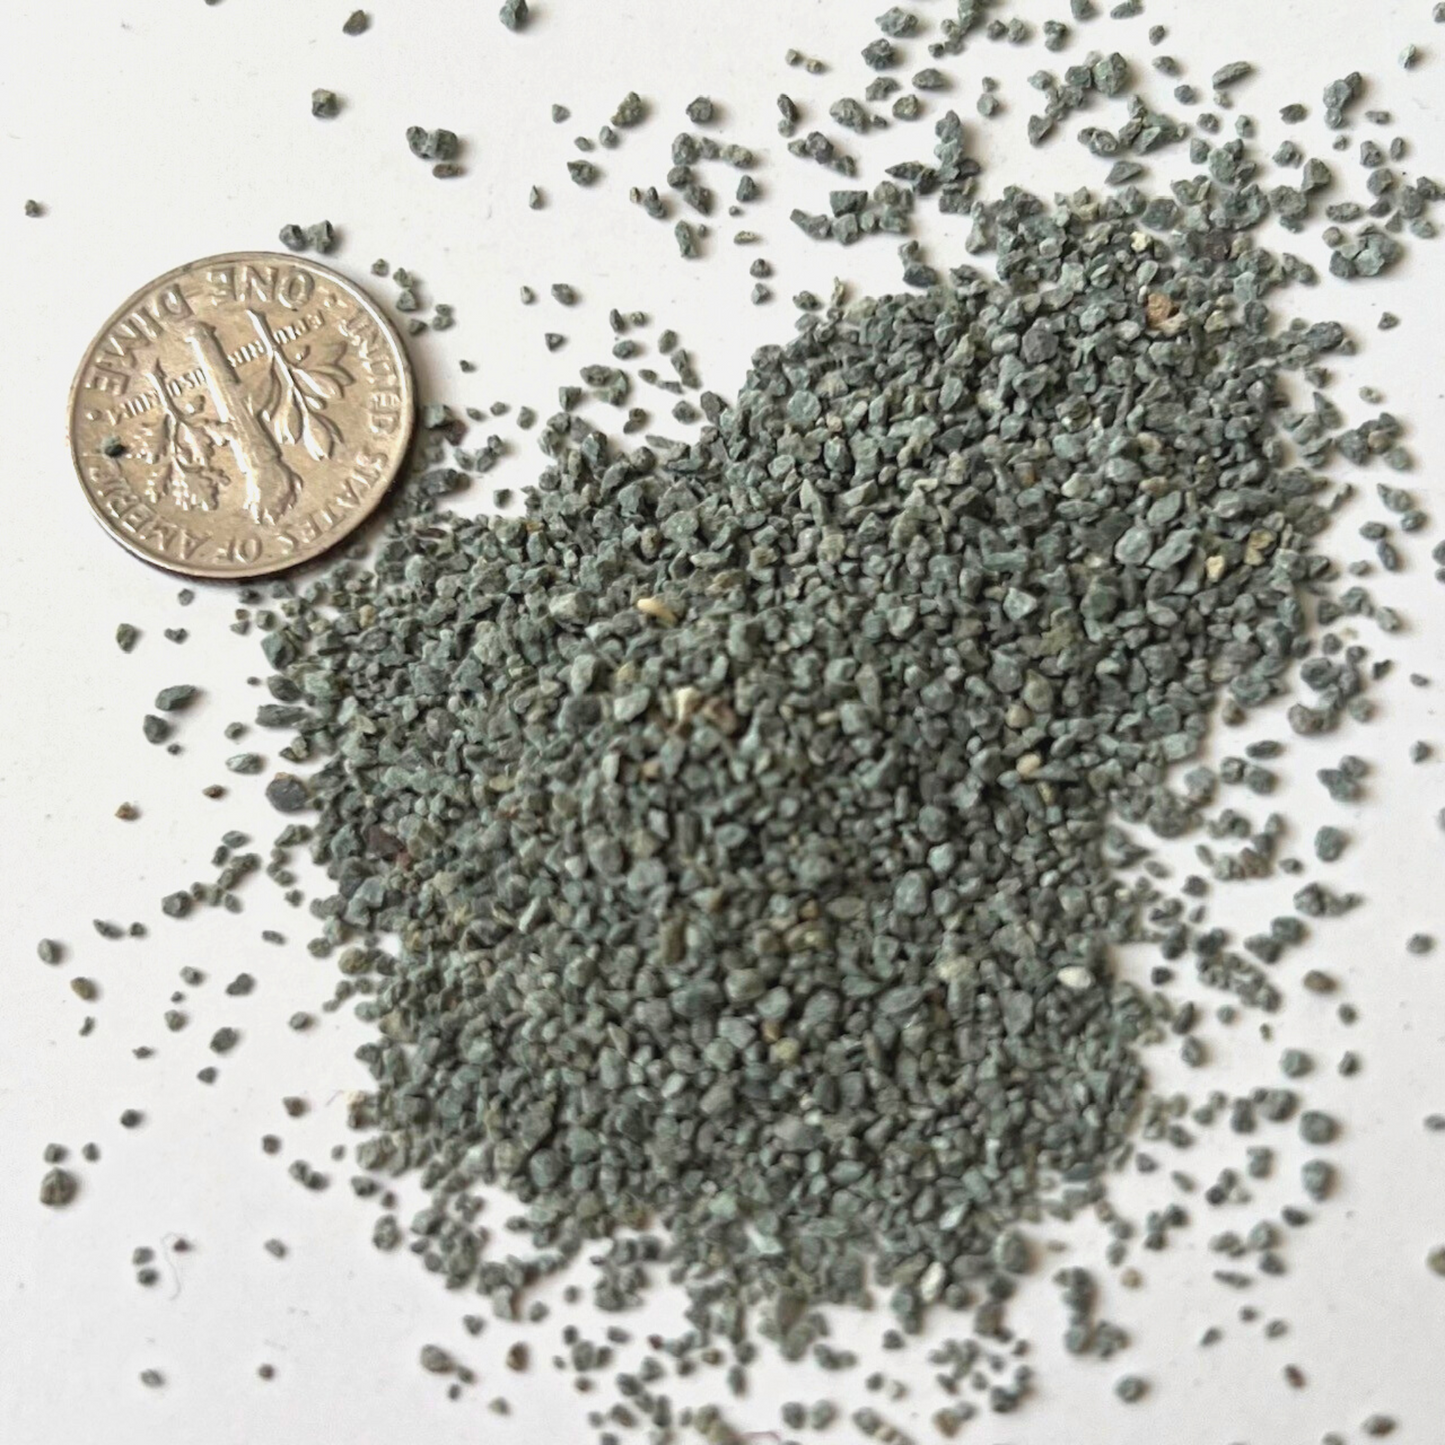 A pile of zeolite granules beside a 10 cent coin to show the various granule sizes.